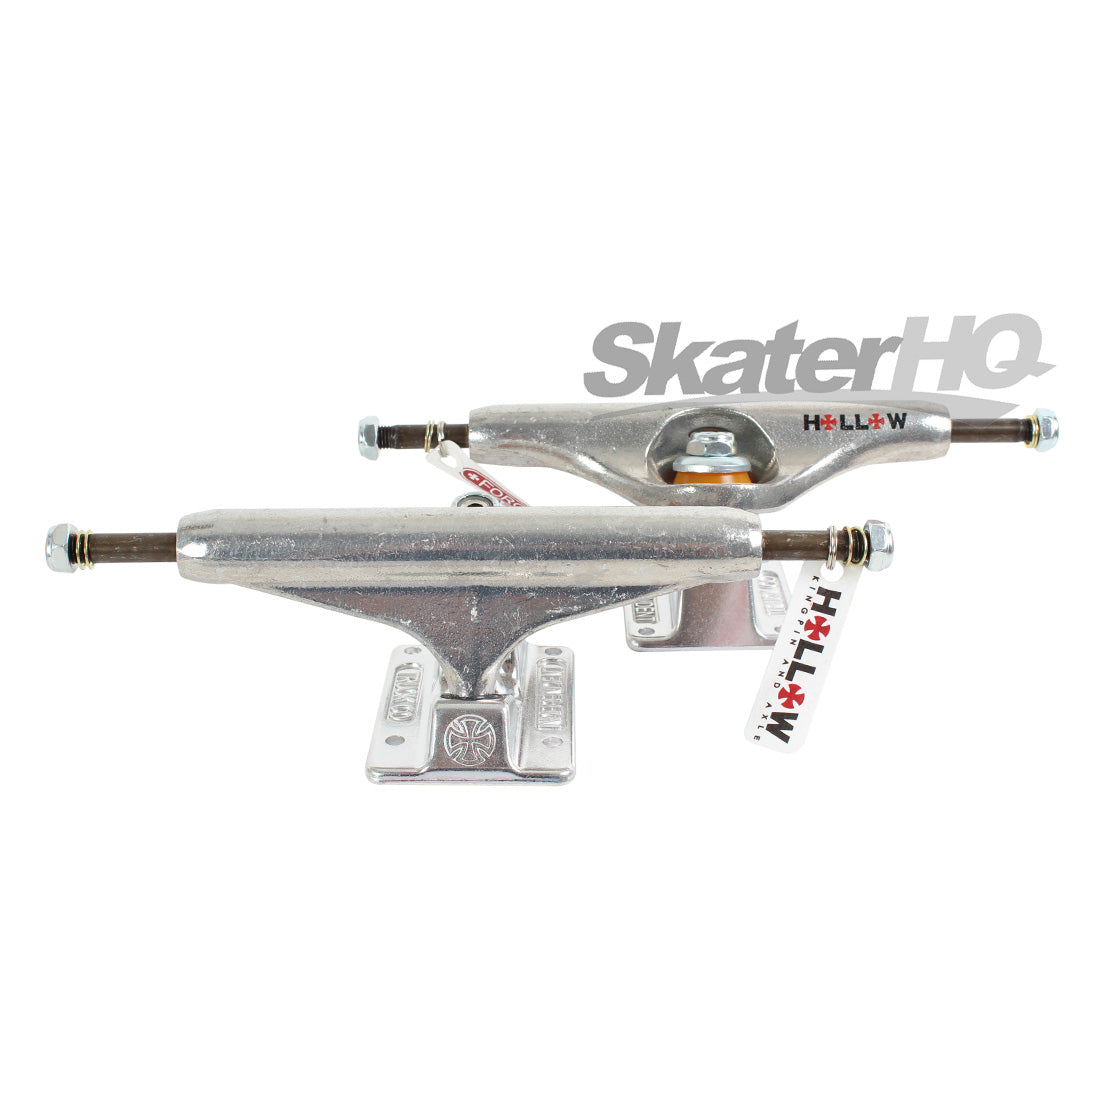 Independent 149 Forged Hollow Trucks - Silver Skateboard Trucks